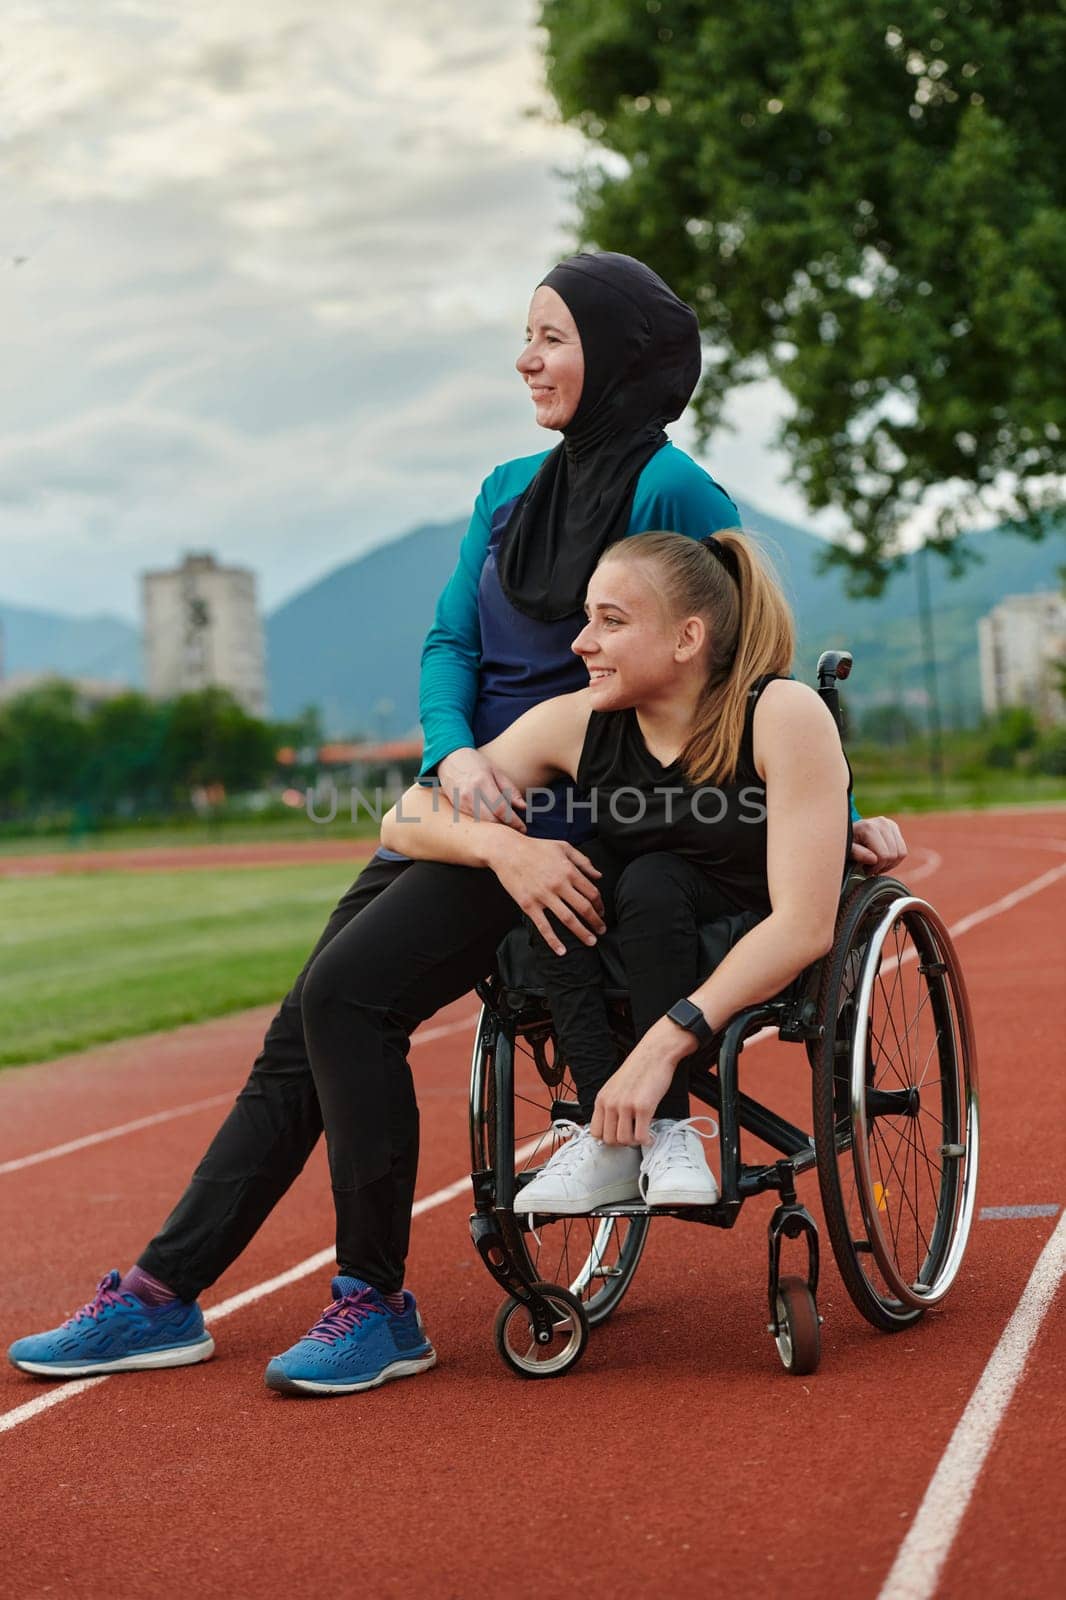 A Muslim woman wearing a burqa resting with a woman with disability after a hard training session on the marathon course by dotshock